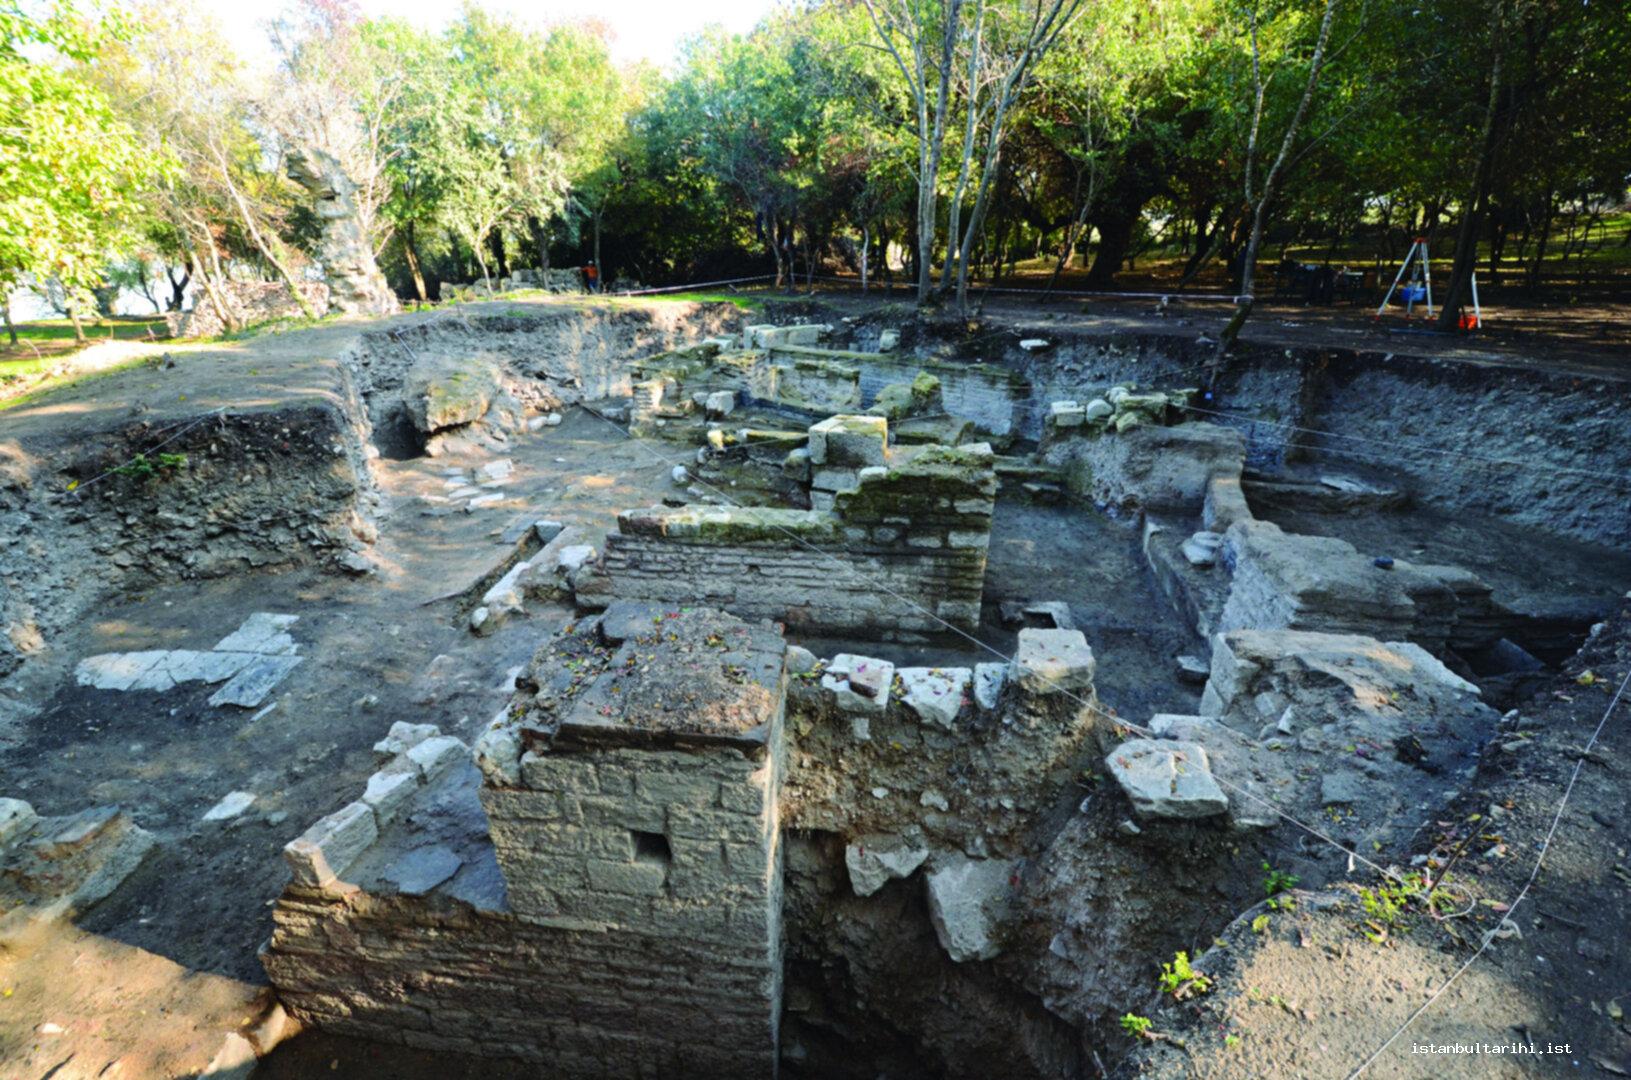 18- Scenes from the works of region II excavations